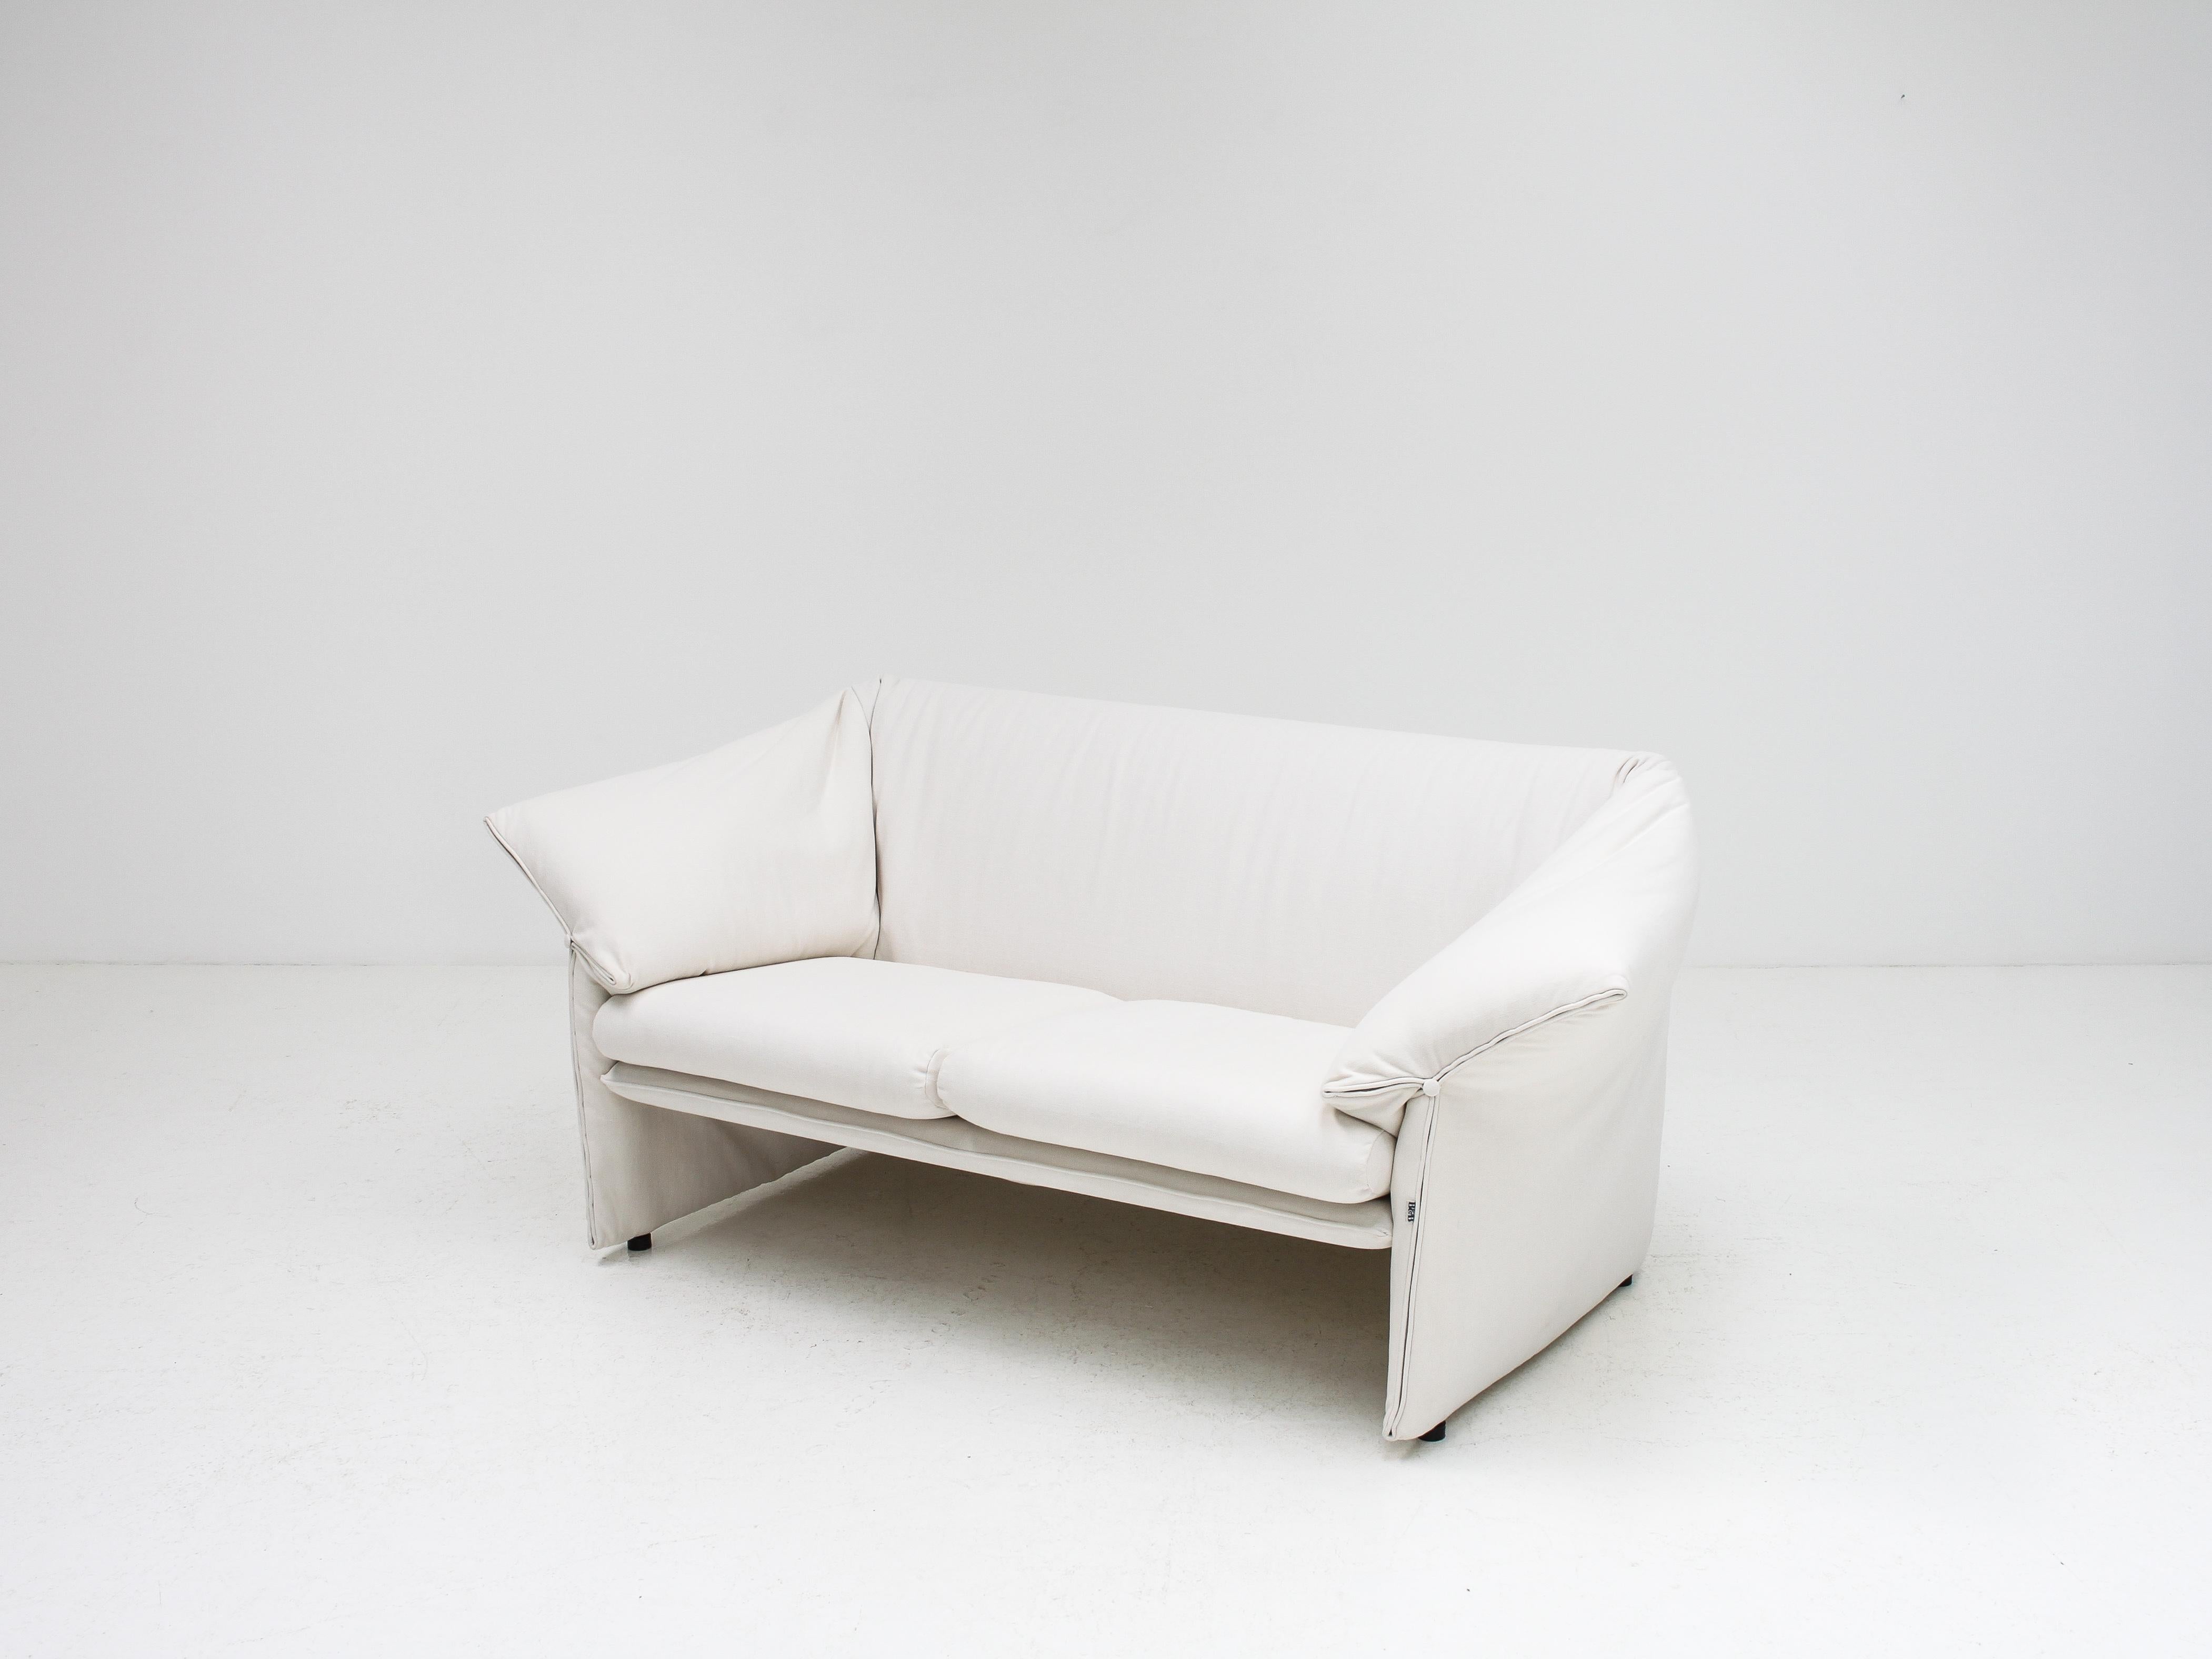 Metal  'Le Stelle' Loveseat Sofa by Mario Bellini for B&B Italia, 1974, Reupholstered